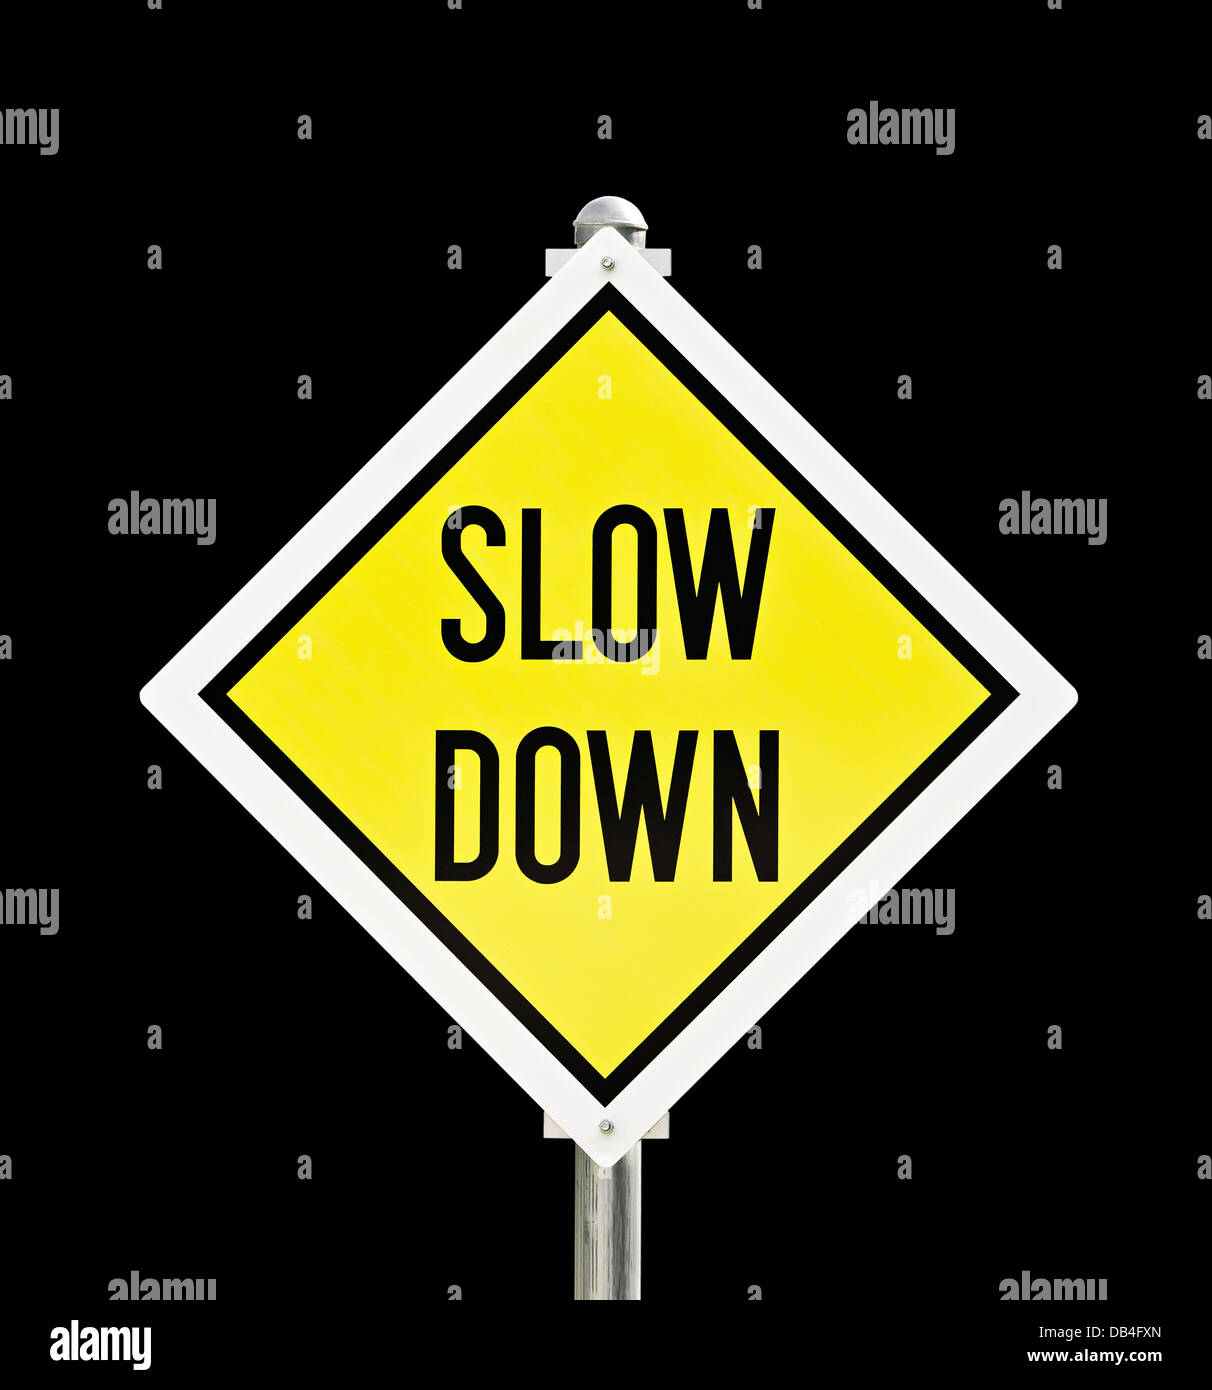 Slow Down yellow road sign isolated over black background Stock Photo